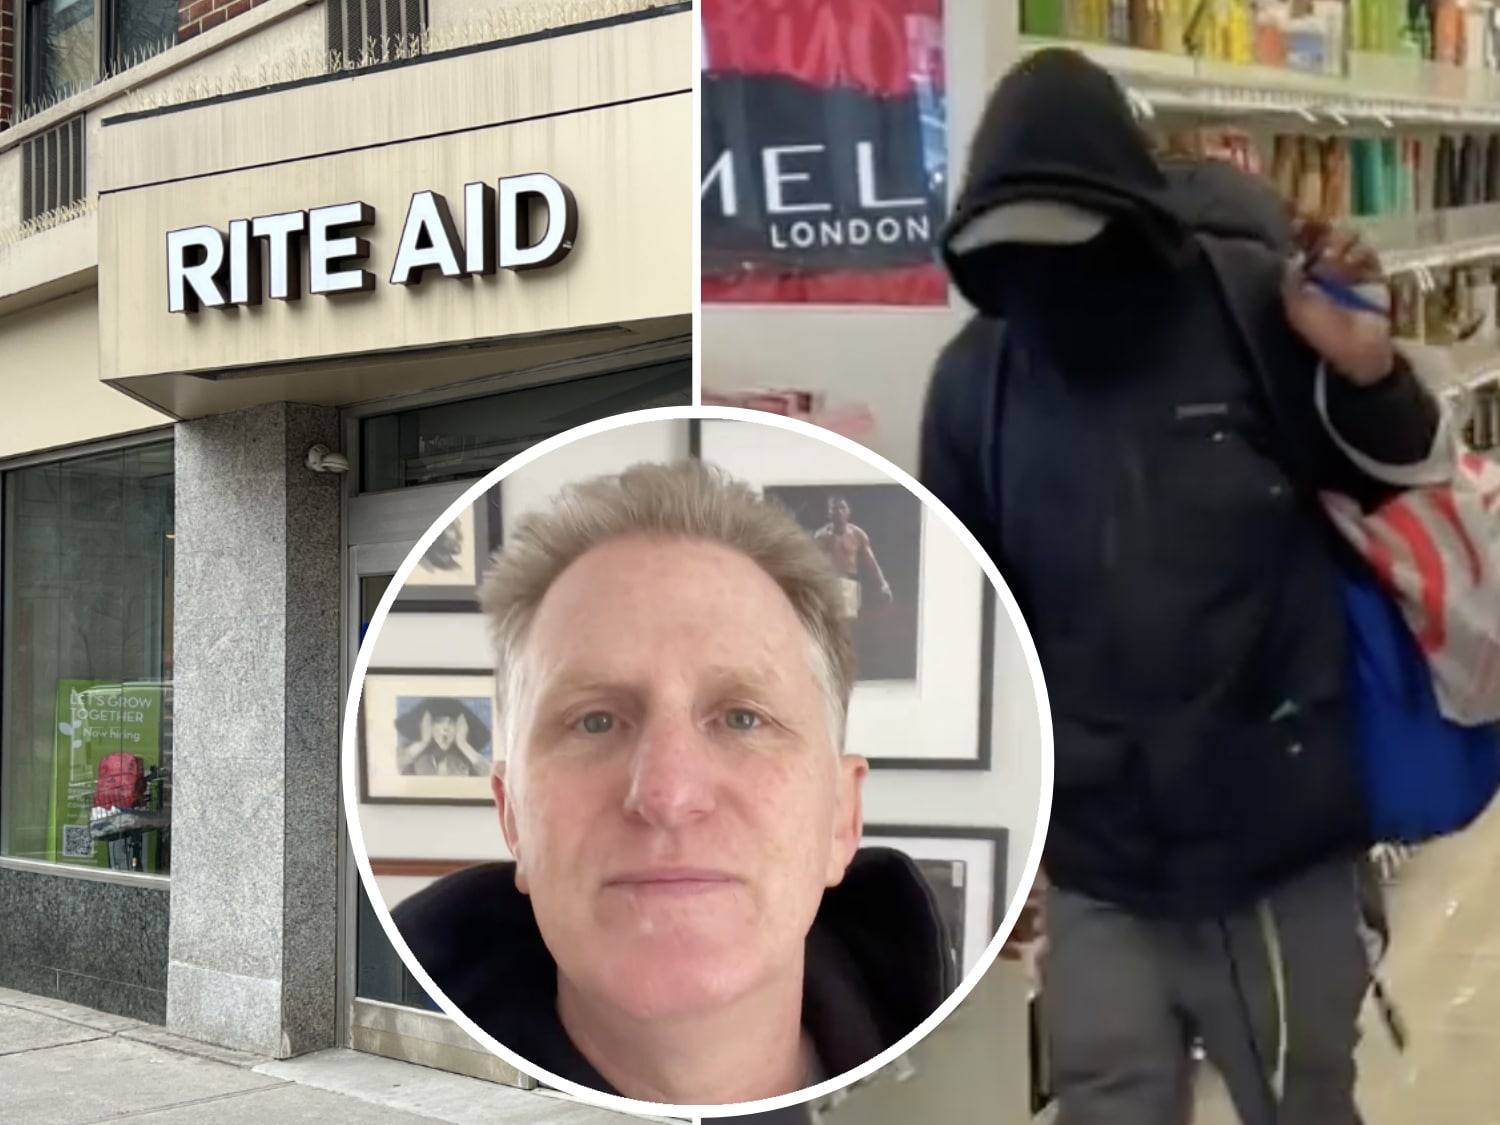 Comedian Michael Rapaport goes off on suspected shoplifter in closing UES Rite Aid/Upper East Site, Michael Rappaport